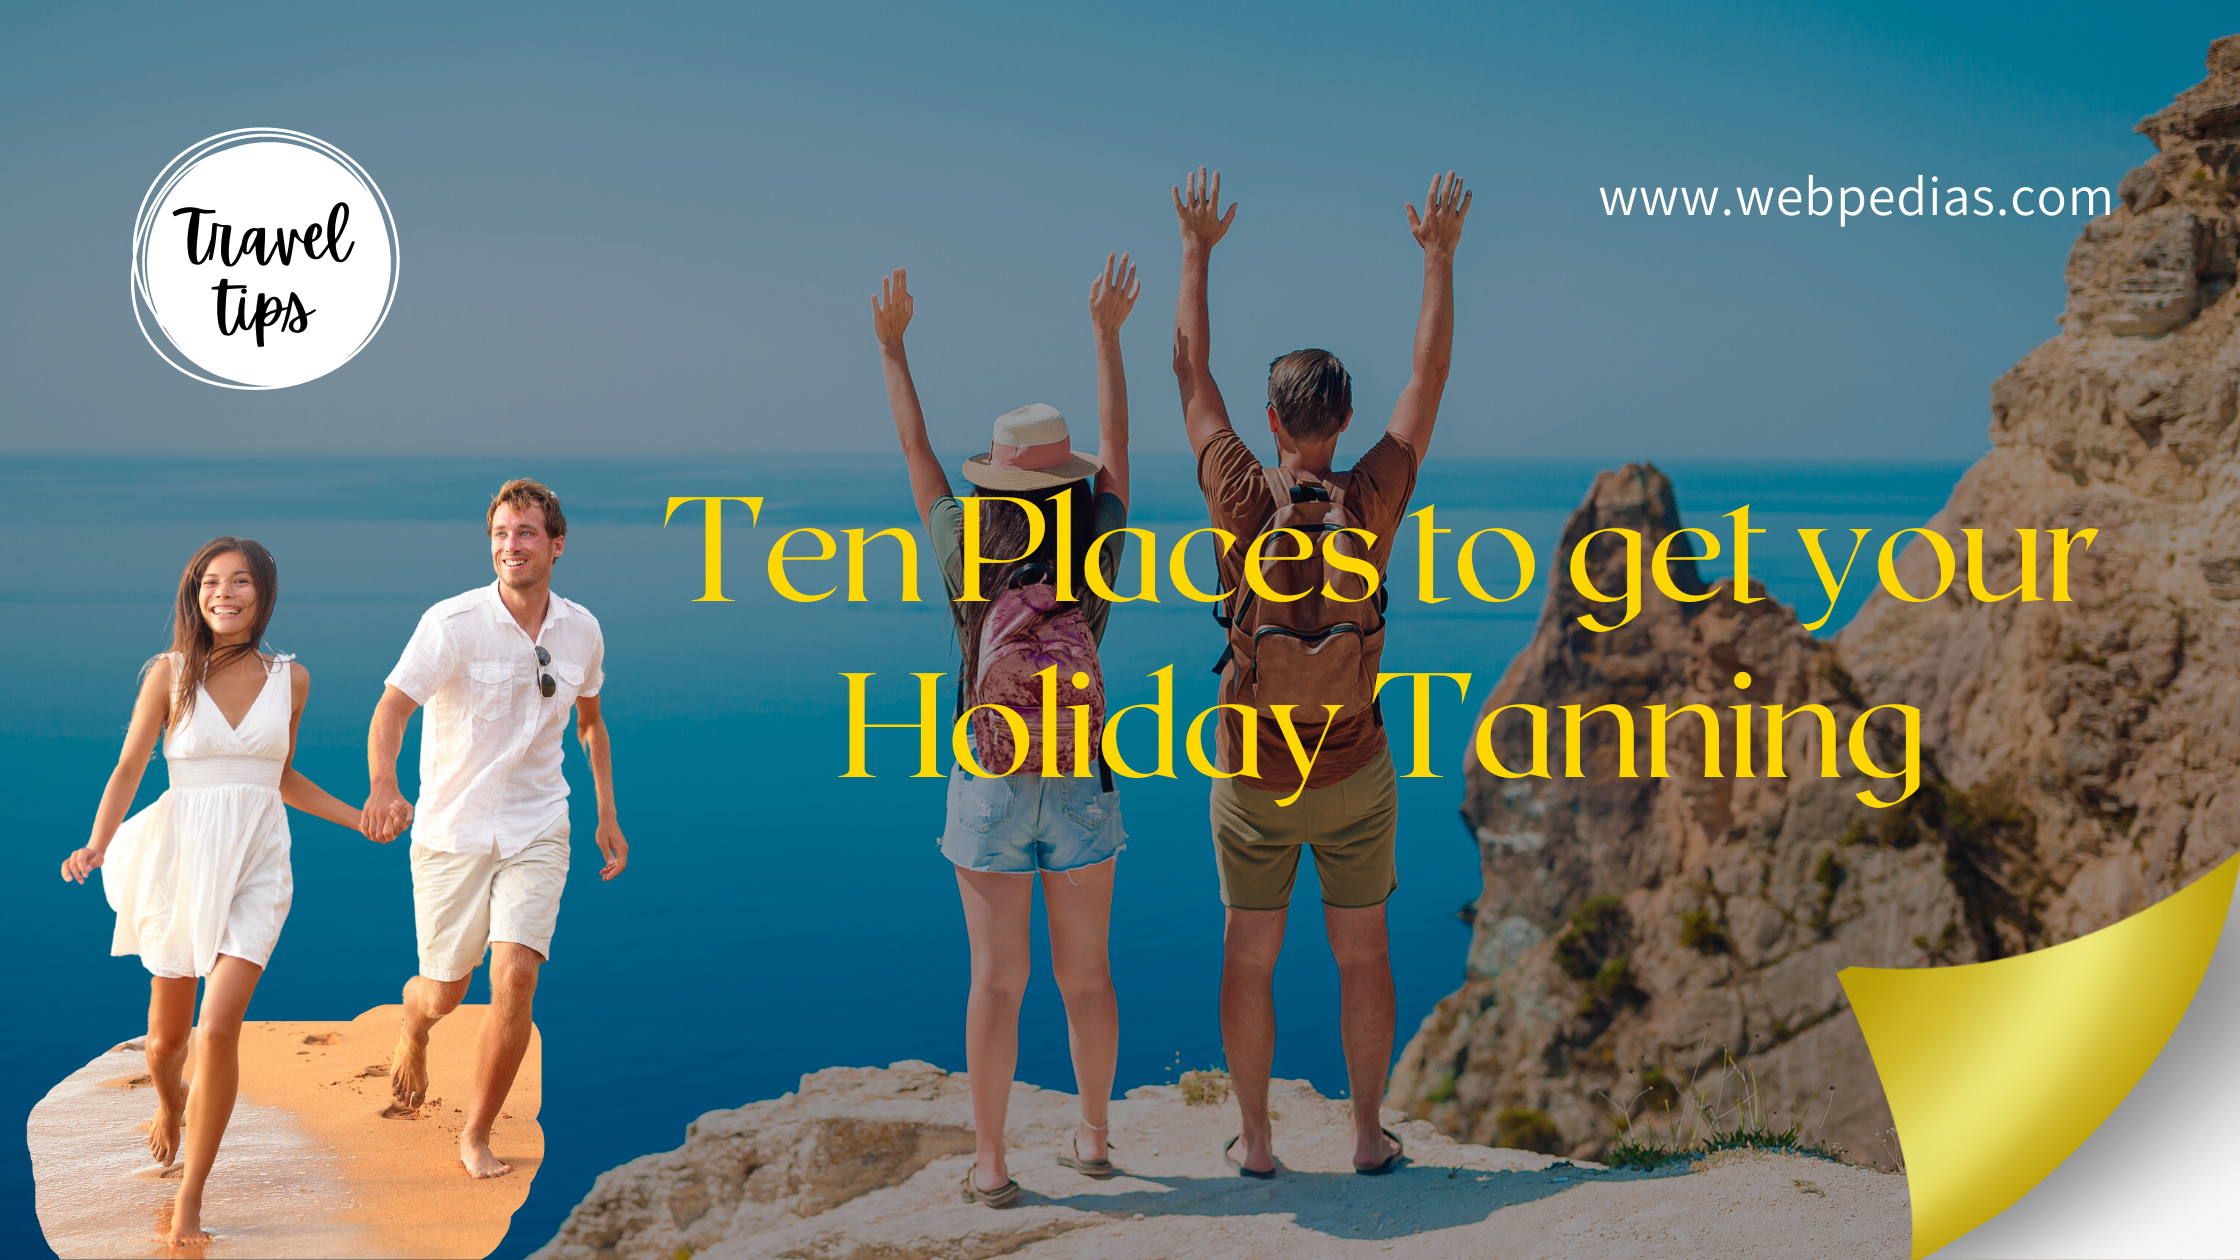 Ten Places to get your Holiday Tanning